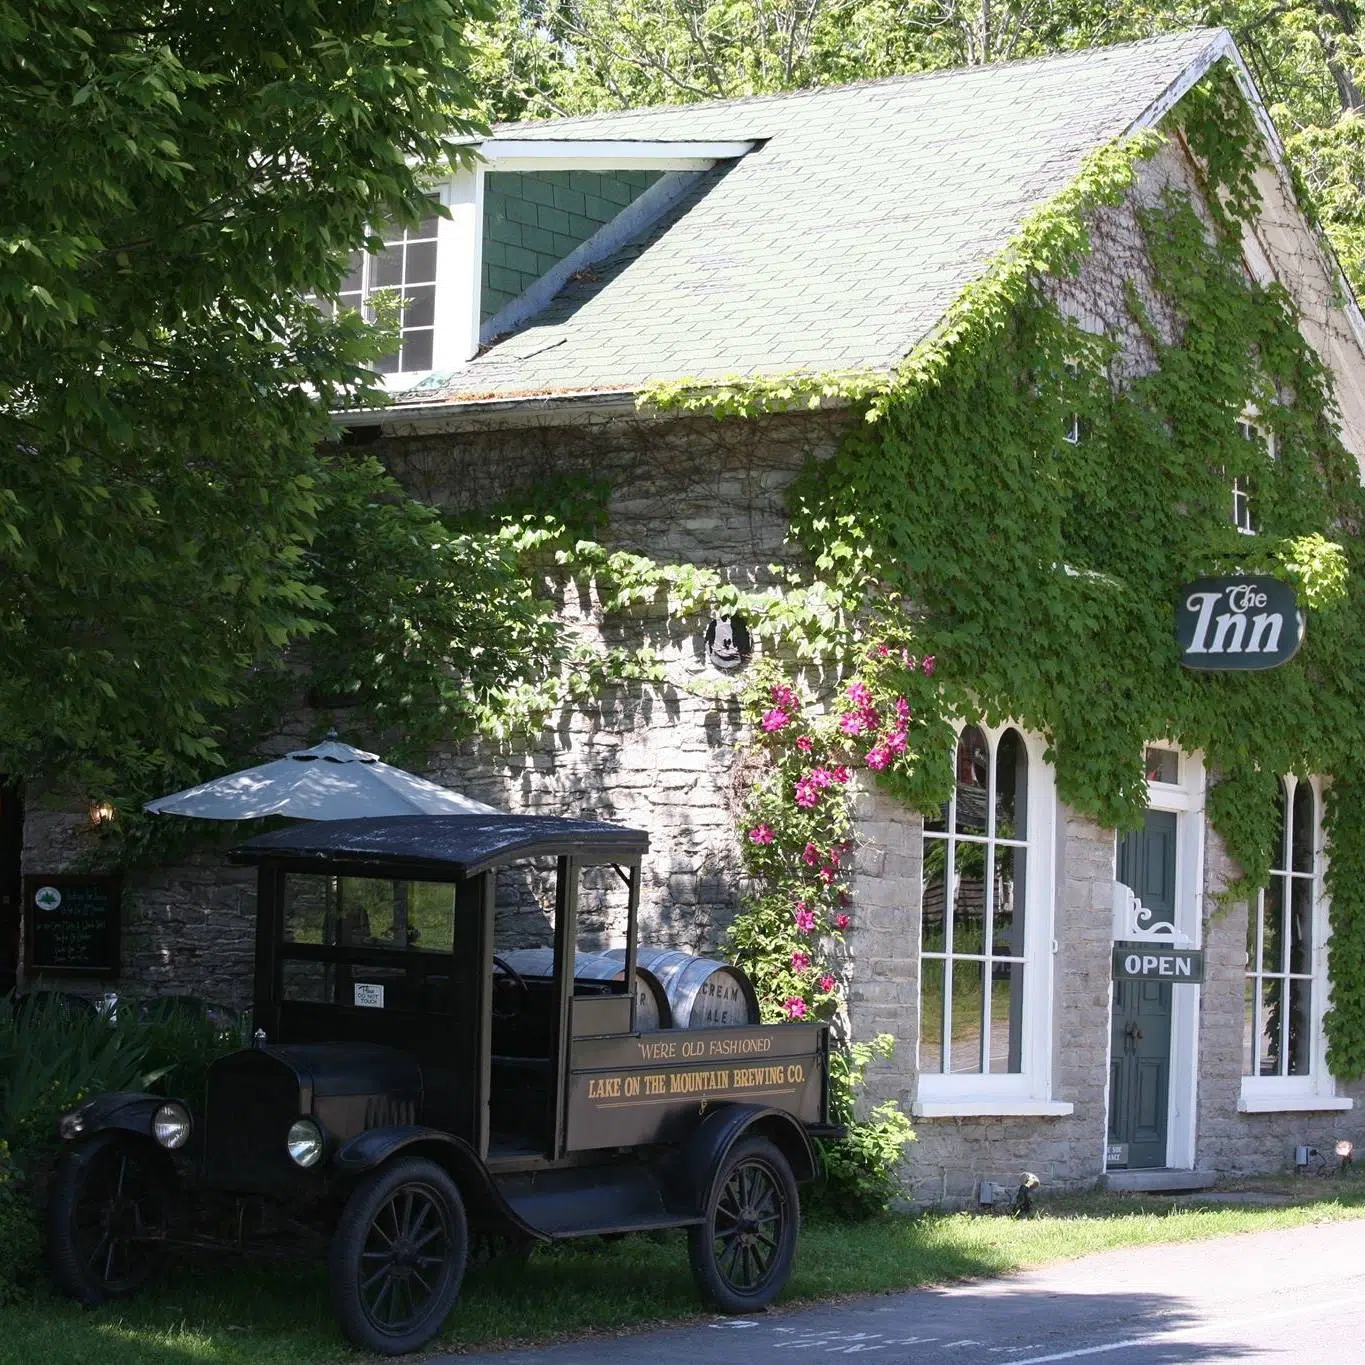 Inn at Lake on the Mountain, Miller House closing in light of parking restrictions